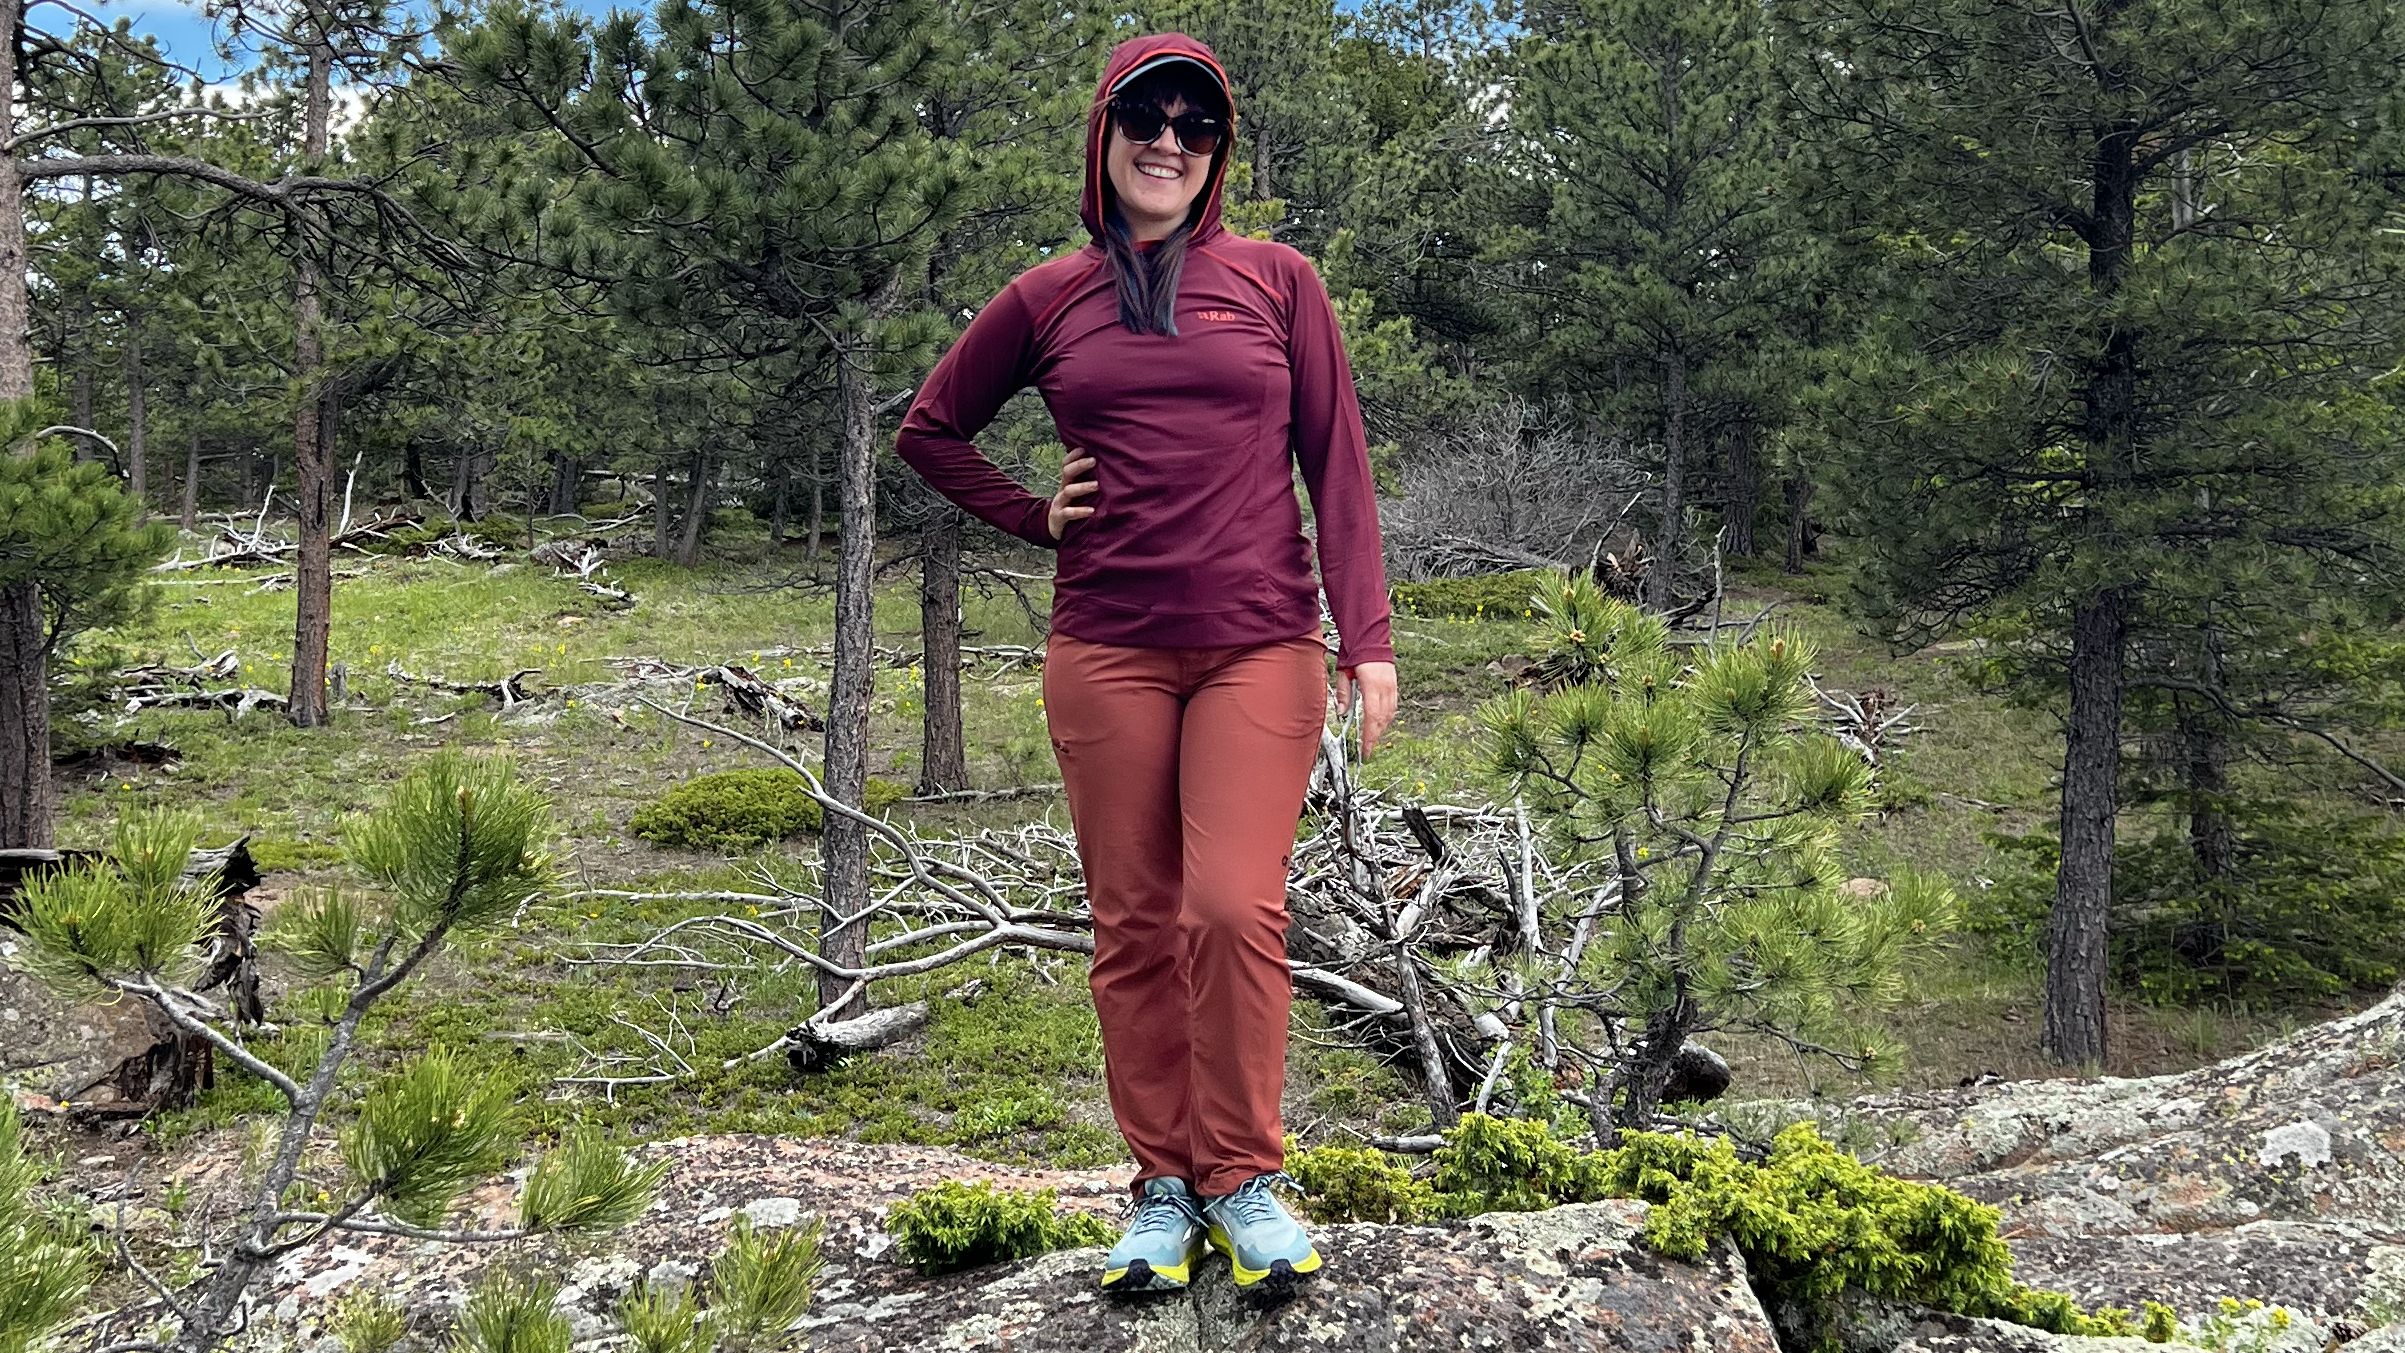 Rab Force Hoody review: A breathable sun shirt